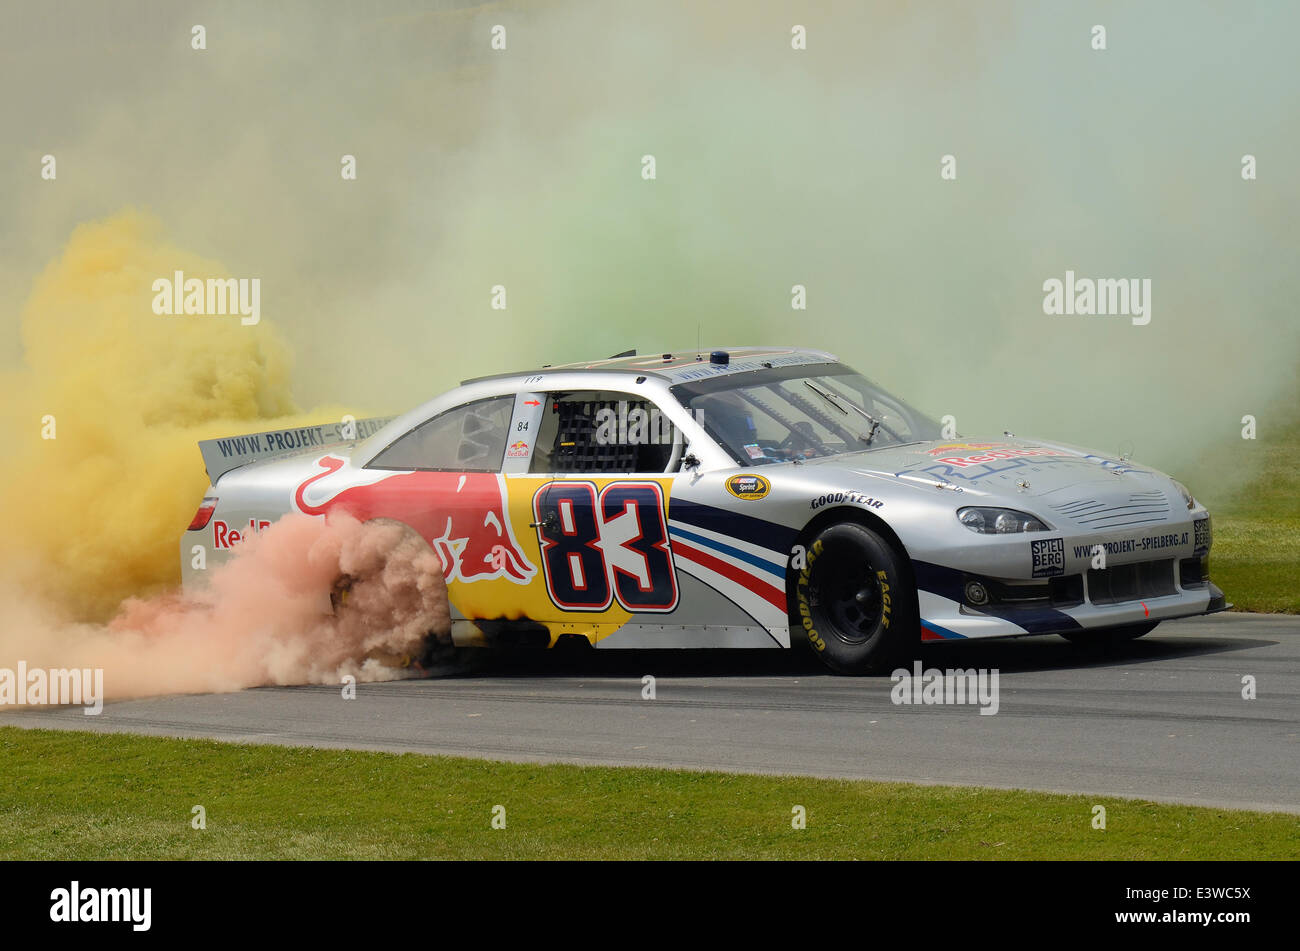 The Goodwood Festival of Speed. Toyota Camry race car burning rubber with multi coloured smoke Stock Photo